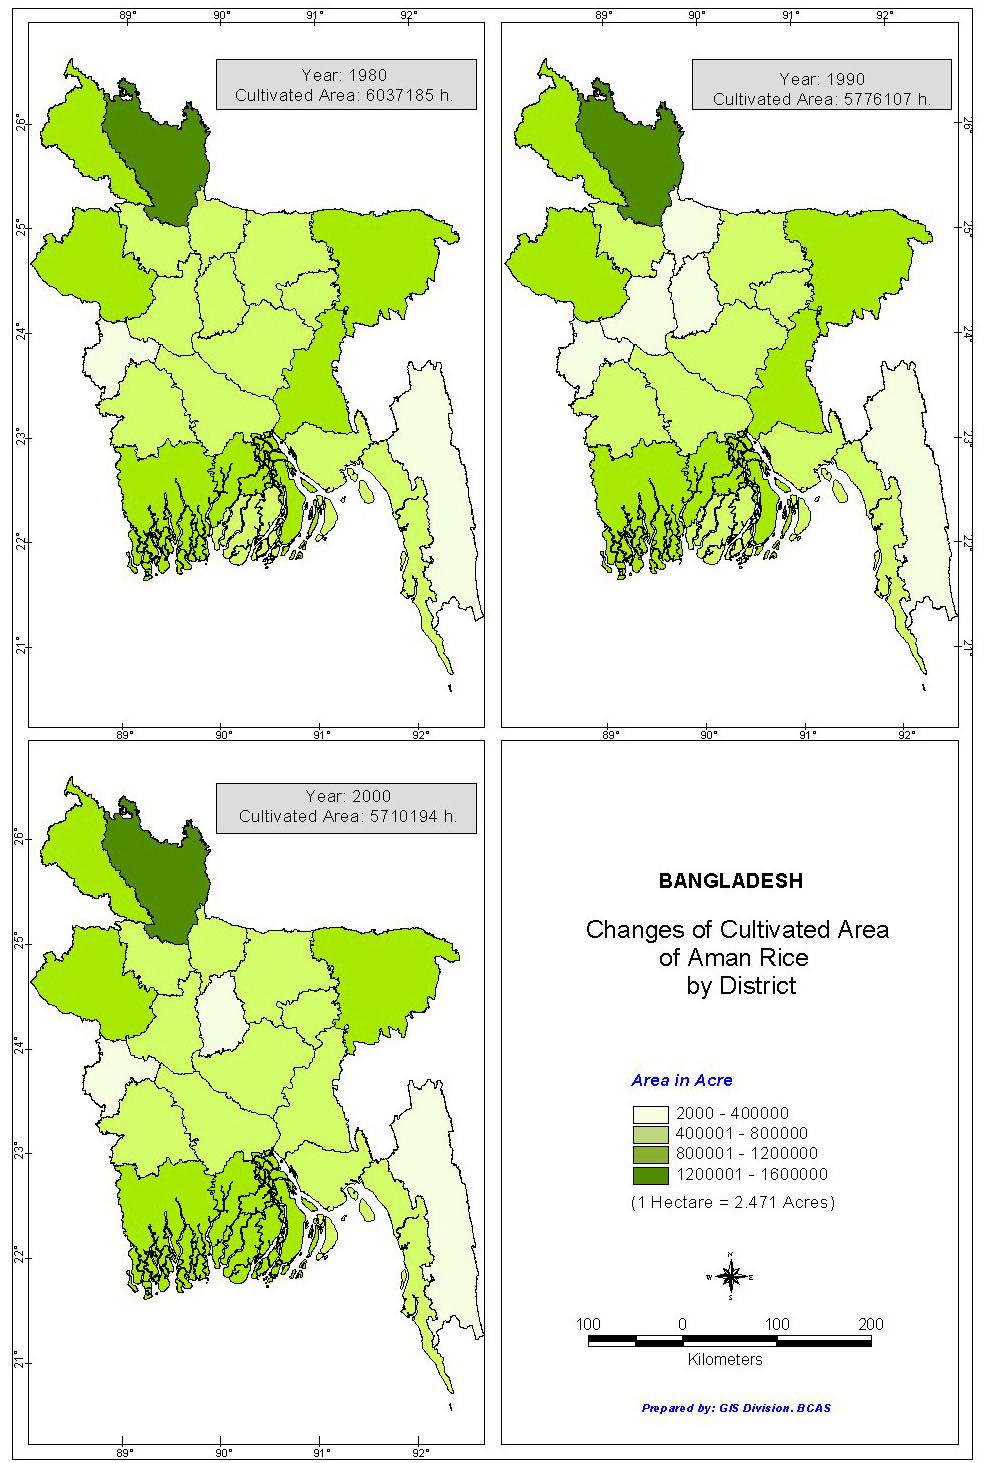 Study Results: Changes in Aman Cropped Area Aman cropped area has not declined significantly over the years In 1980, it